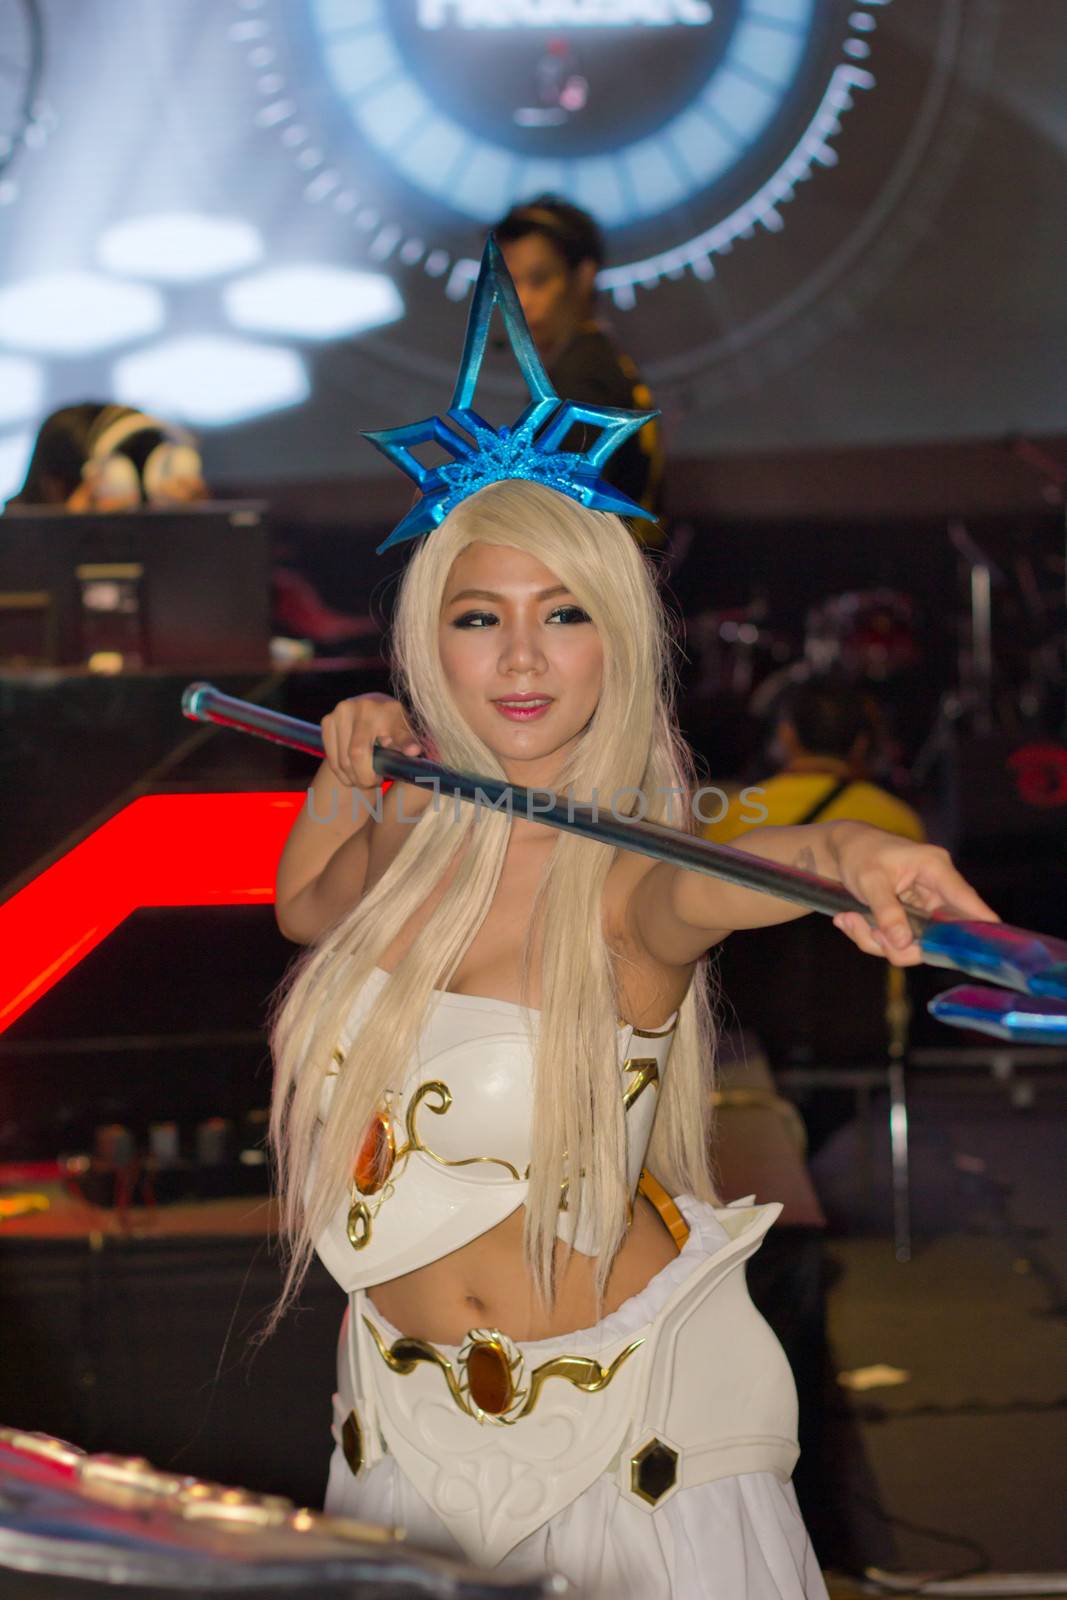 An unidentified Japanese anime cosplay pose in Thailand Game Show BIG Festival 2013 by redthirteen